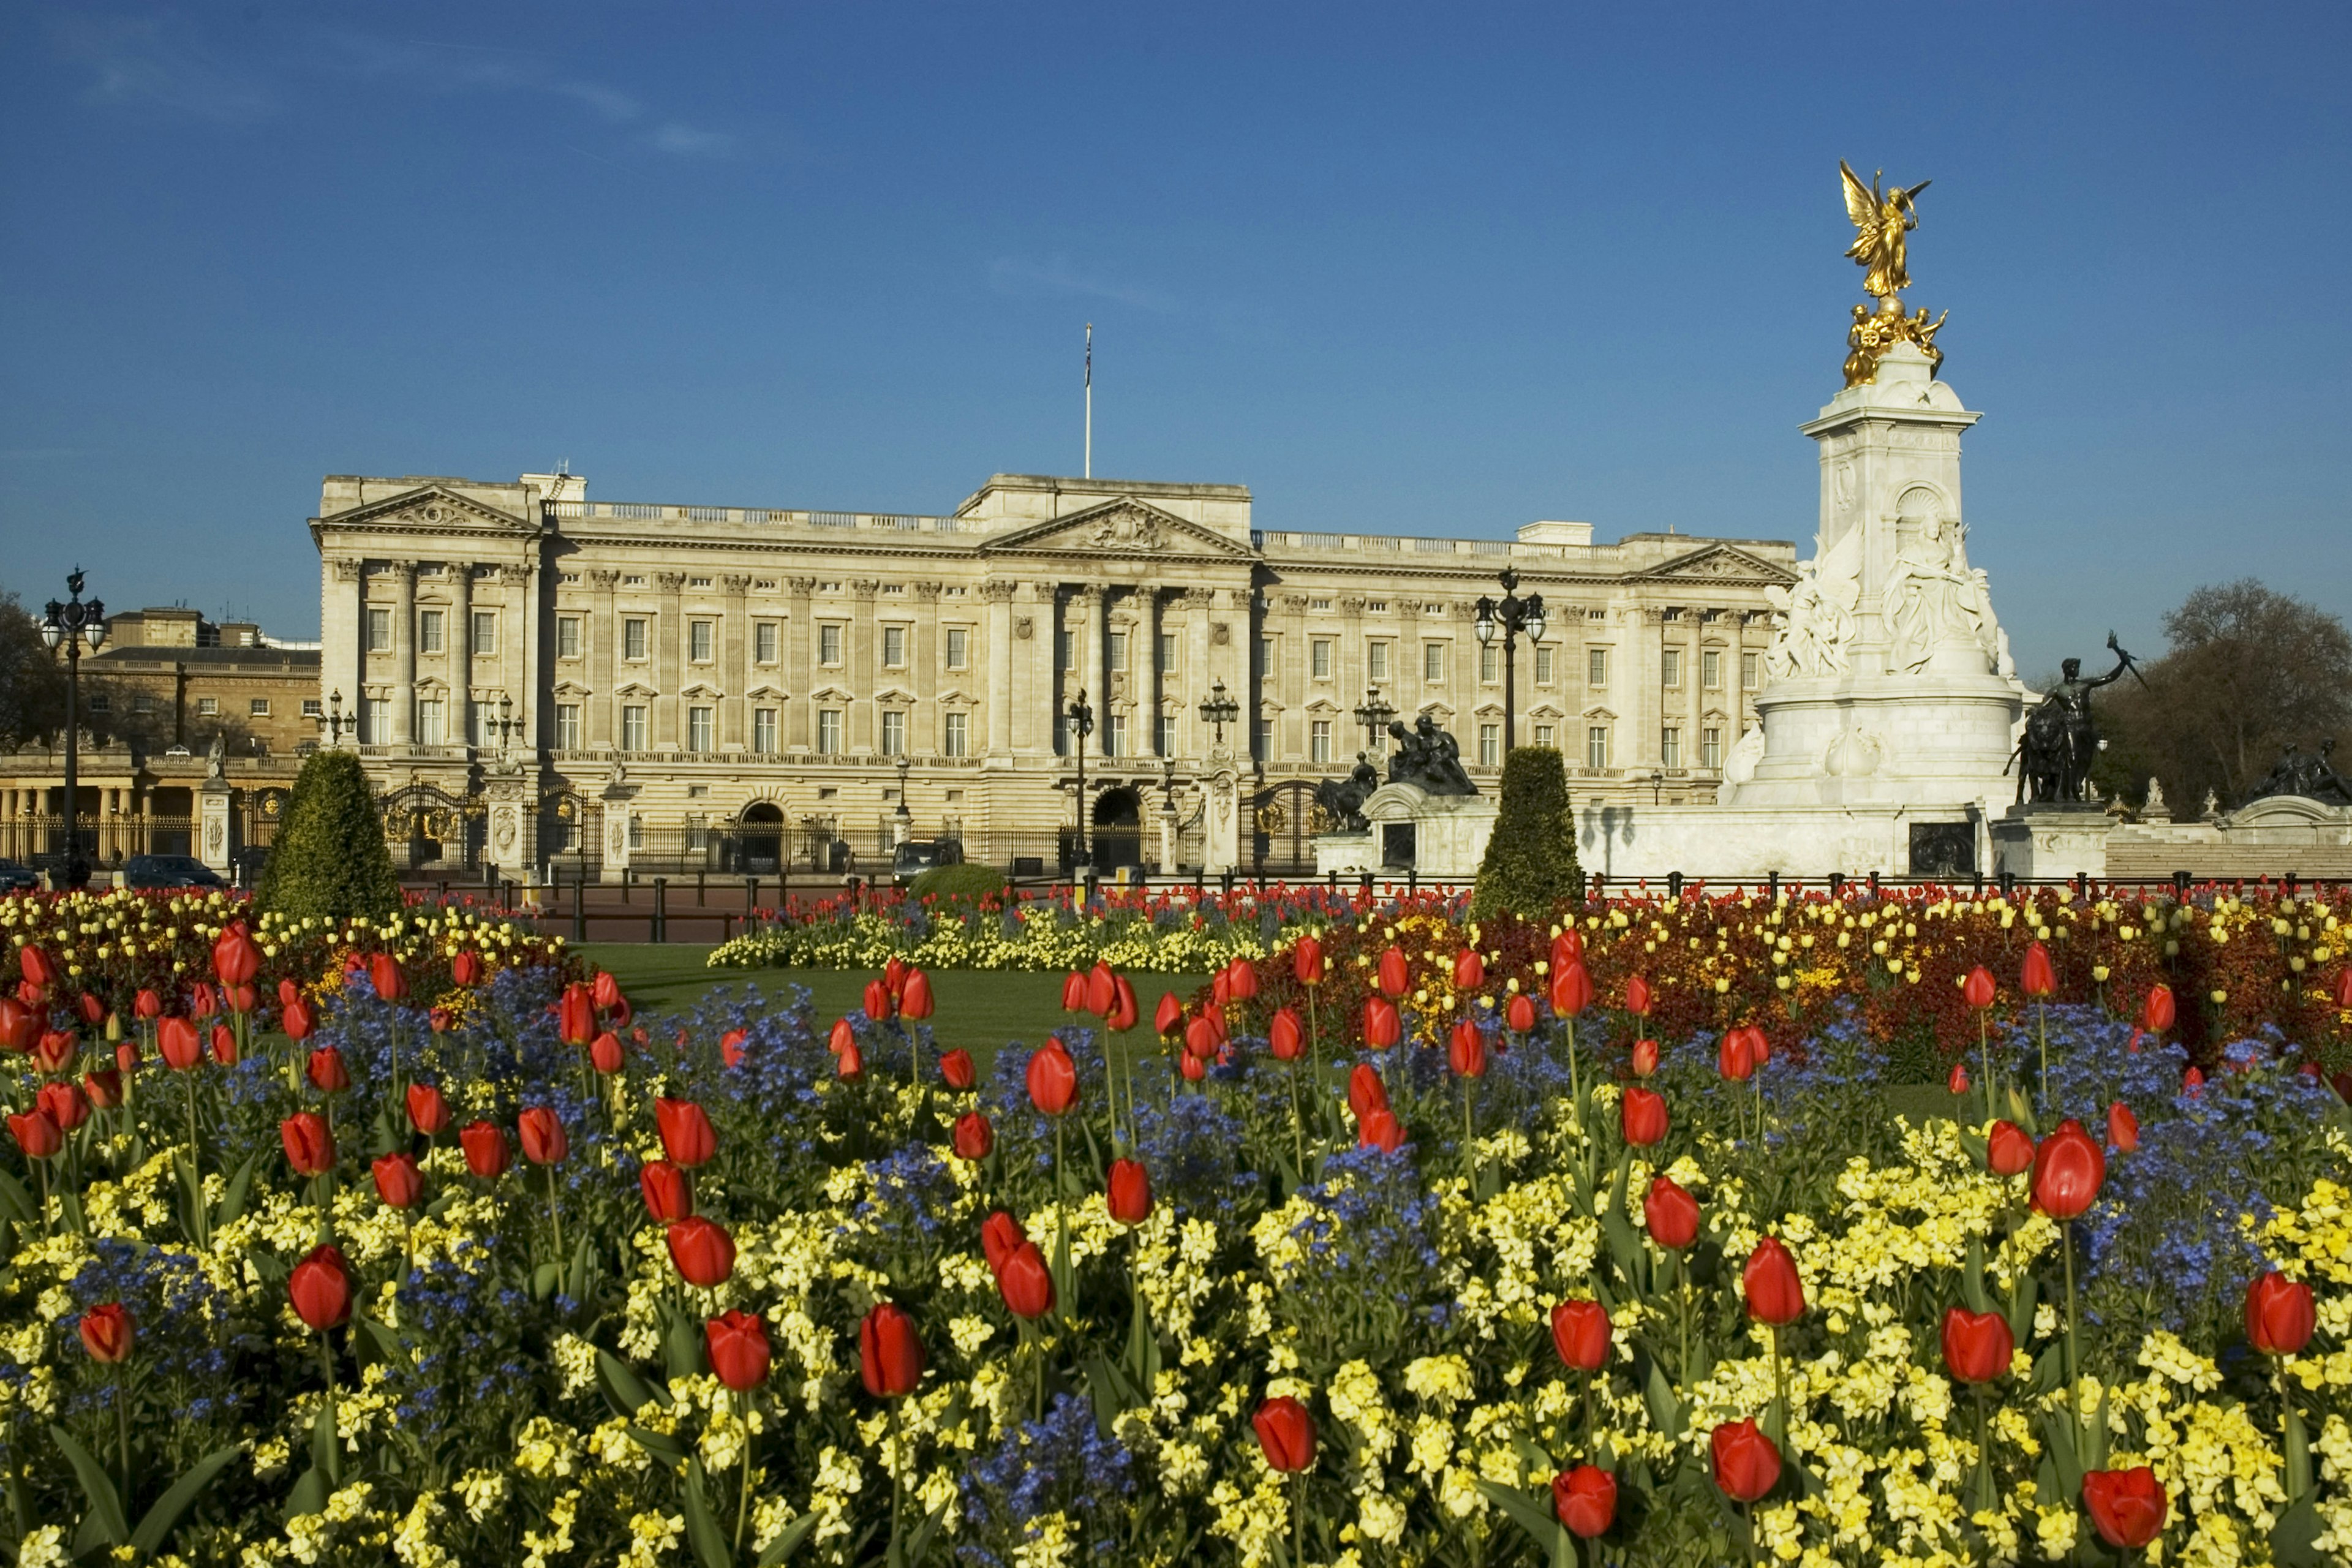 Flowers in front of Buckingham Palace. Image by Charles Bowman / Photolibrary/ Getty